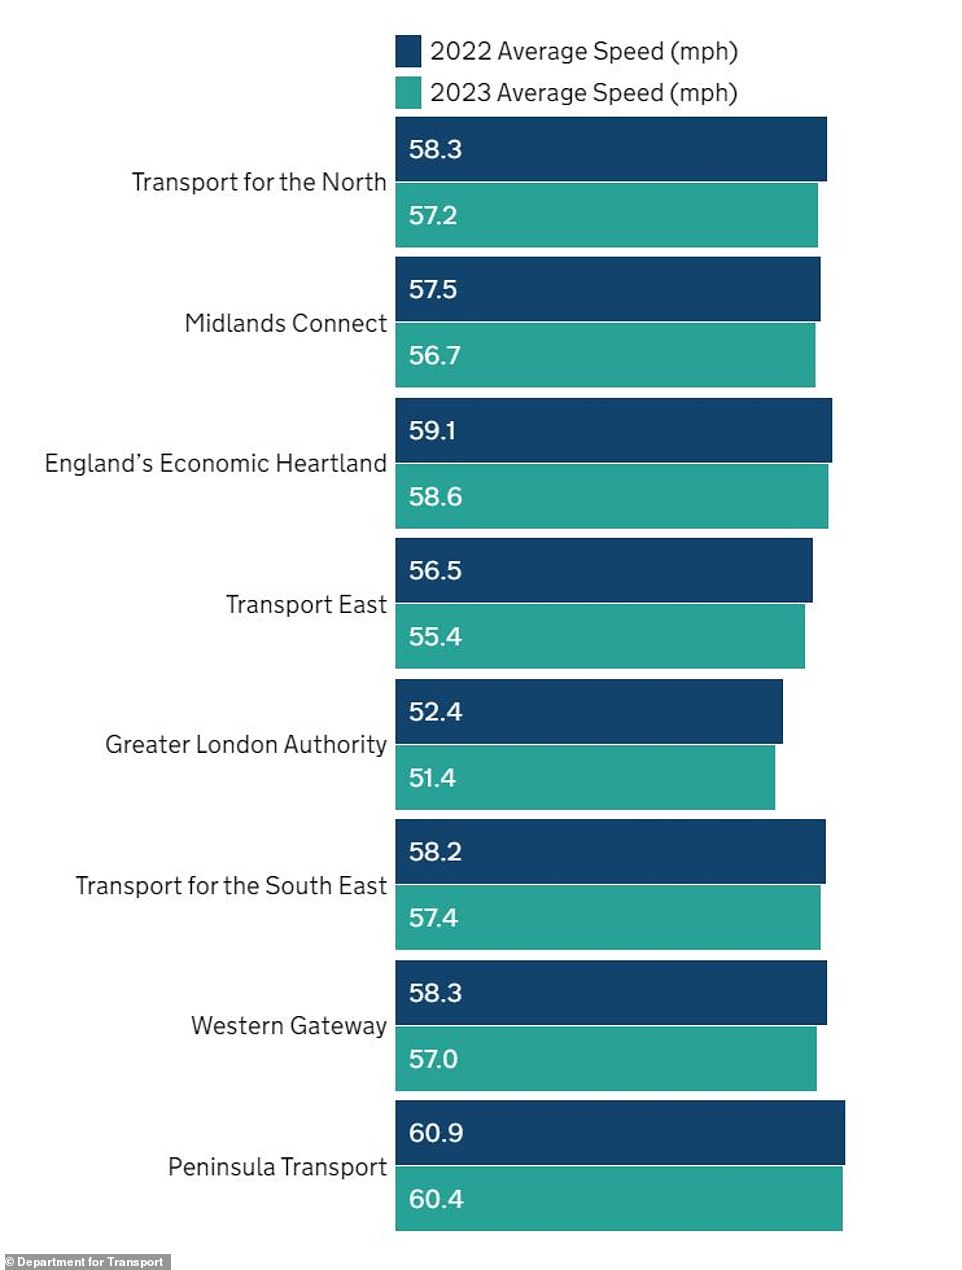 The DfT report also showed what the average speed was on motorways and trunk roads in every region of Britain